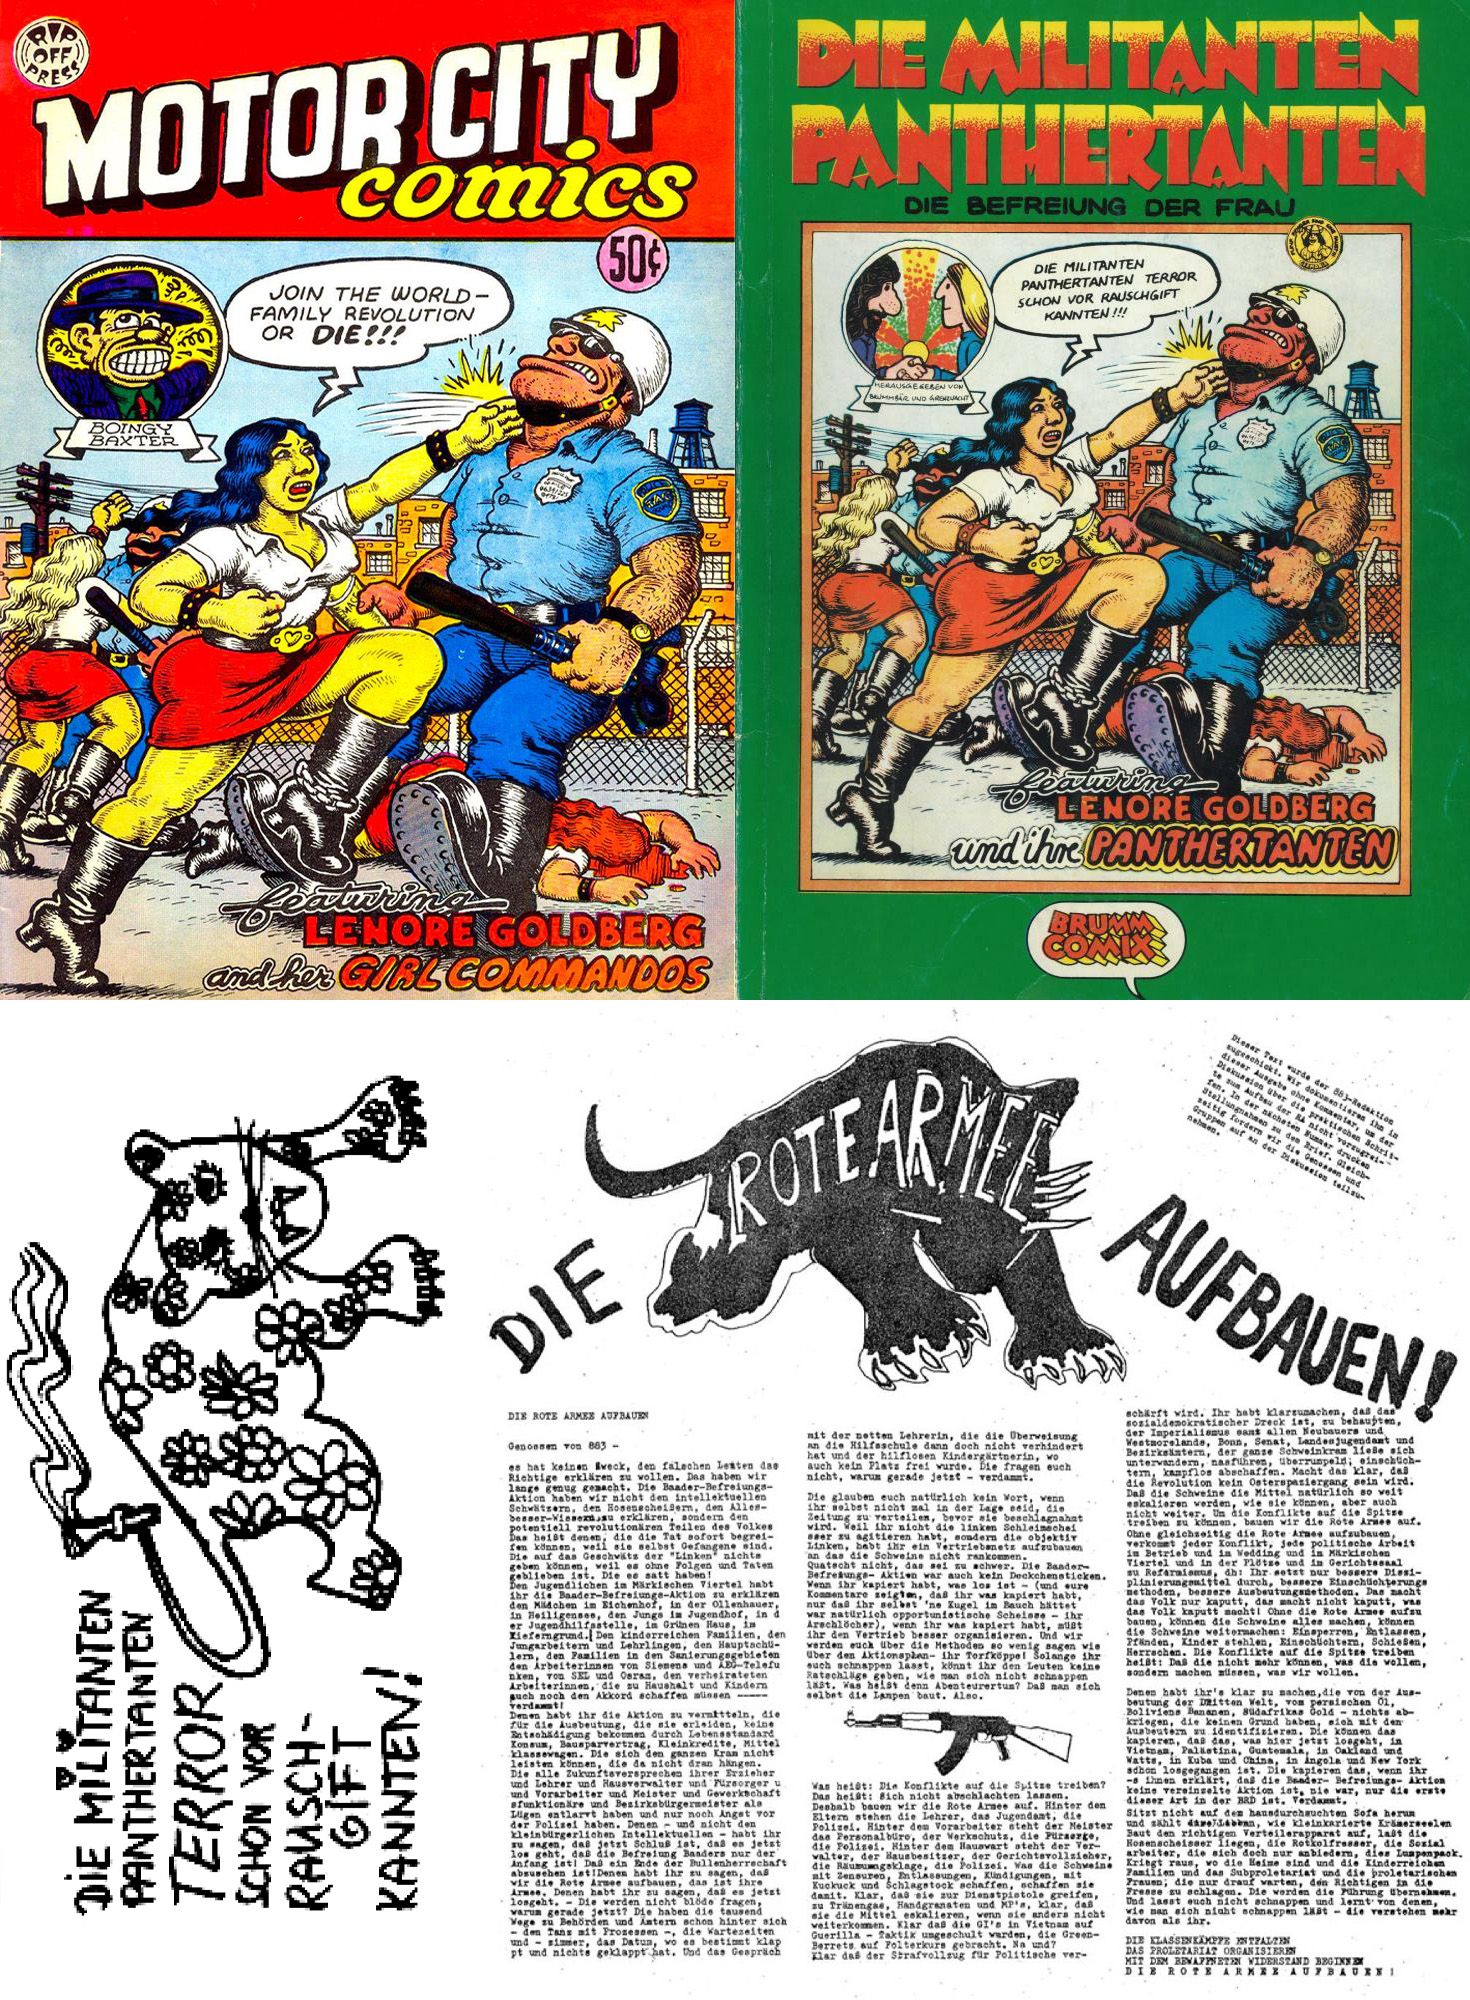 Top left: Robert Crumb publication “Lenore Goldberg and her Girl Commandos”
Top right: German translation > “Lenore Goldberg und ihrer Panthertanten” (Lenore Goldberg and her panther gals); “Join the World Family Revolution” translated to “The militant panther gals knew terror long before they knew hard drugs”
Bottom left: Sticker designed by women from the anarcho-liberatiran Agit 883 editorial collective (ca. 1970) using the same line from the German translation of Crumb’s “Lenore Goldberg and her Girl Commandos”
Bottom right: Article in Agit 883 “Build up the Red Army!” using potentially US-inspired panther imagery (ca. 1970)